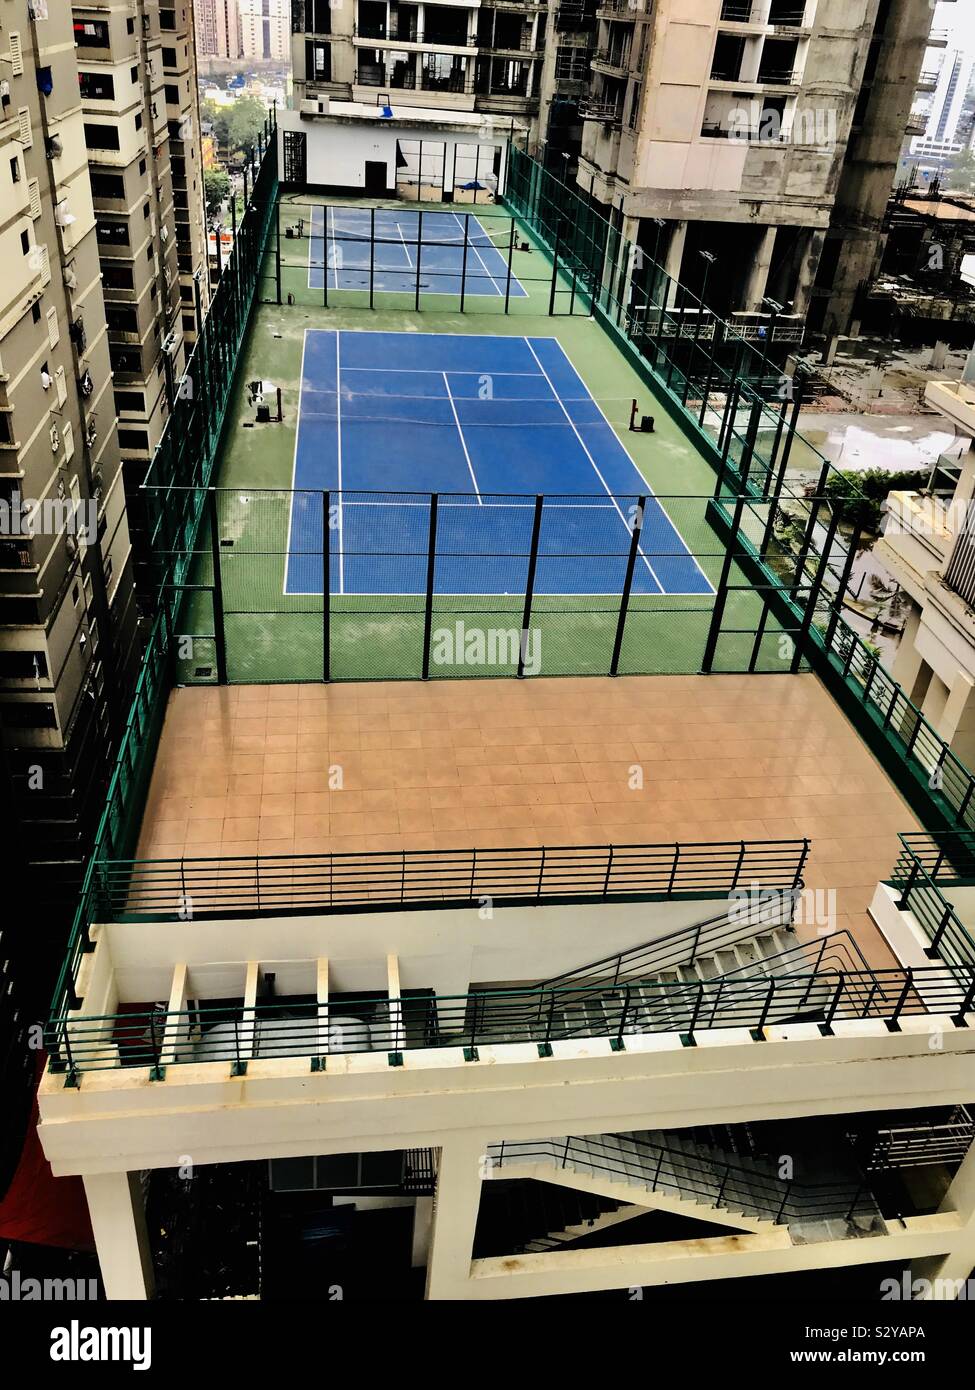 Badminton Table on top of the building Stock Photo